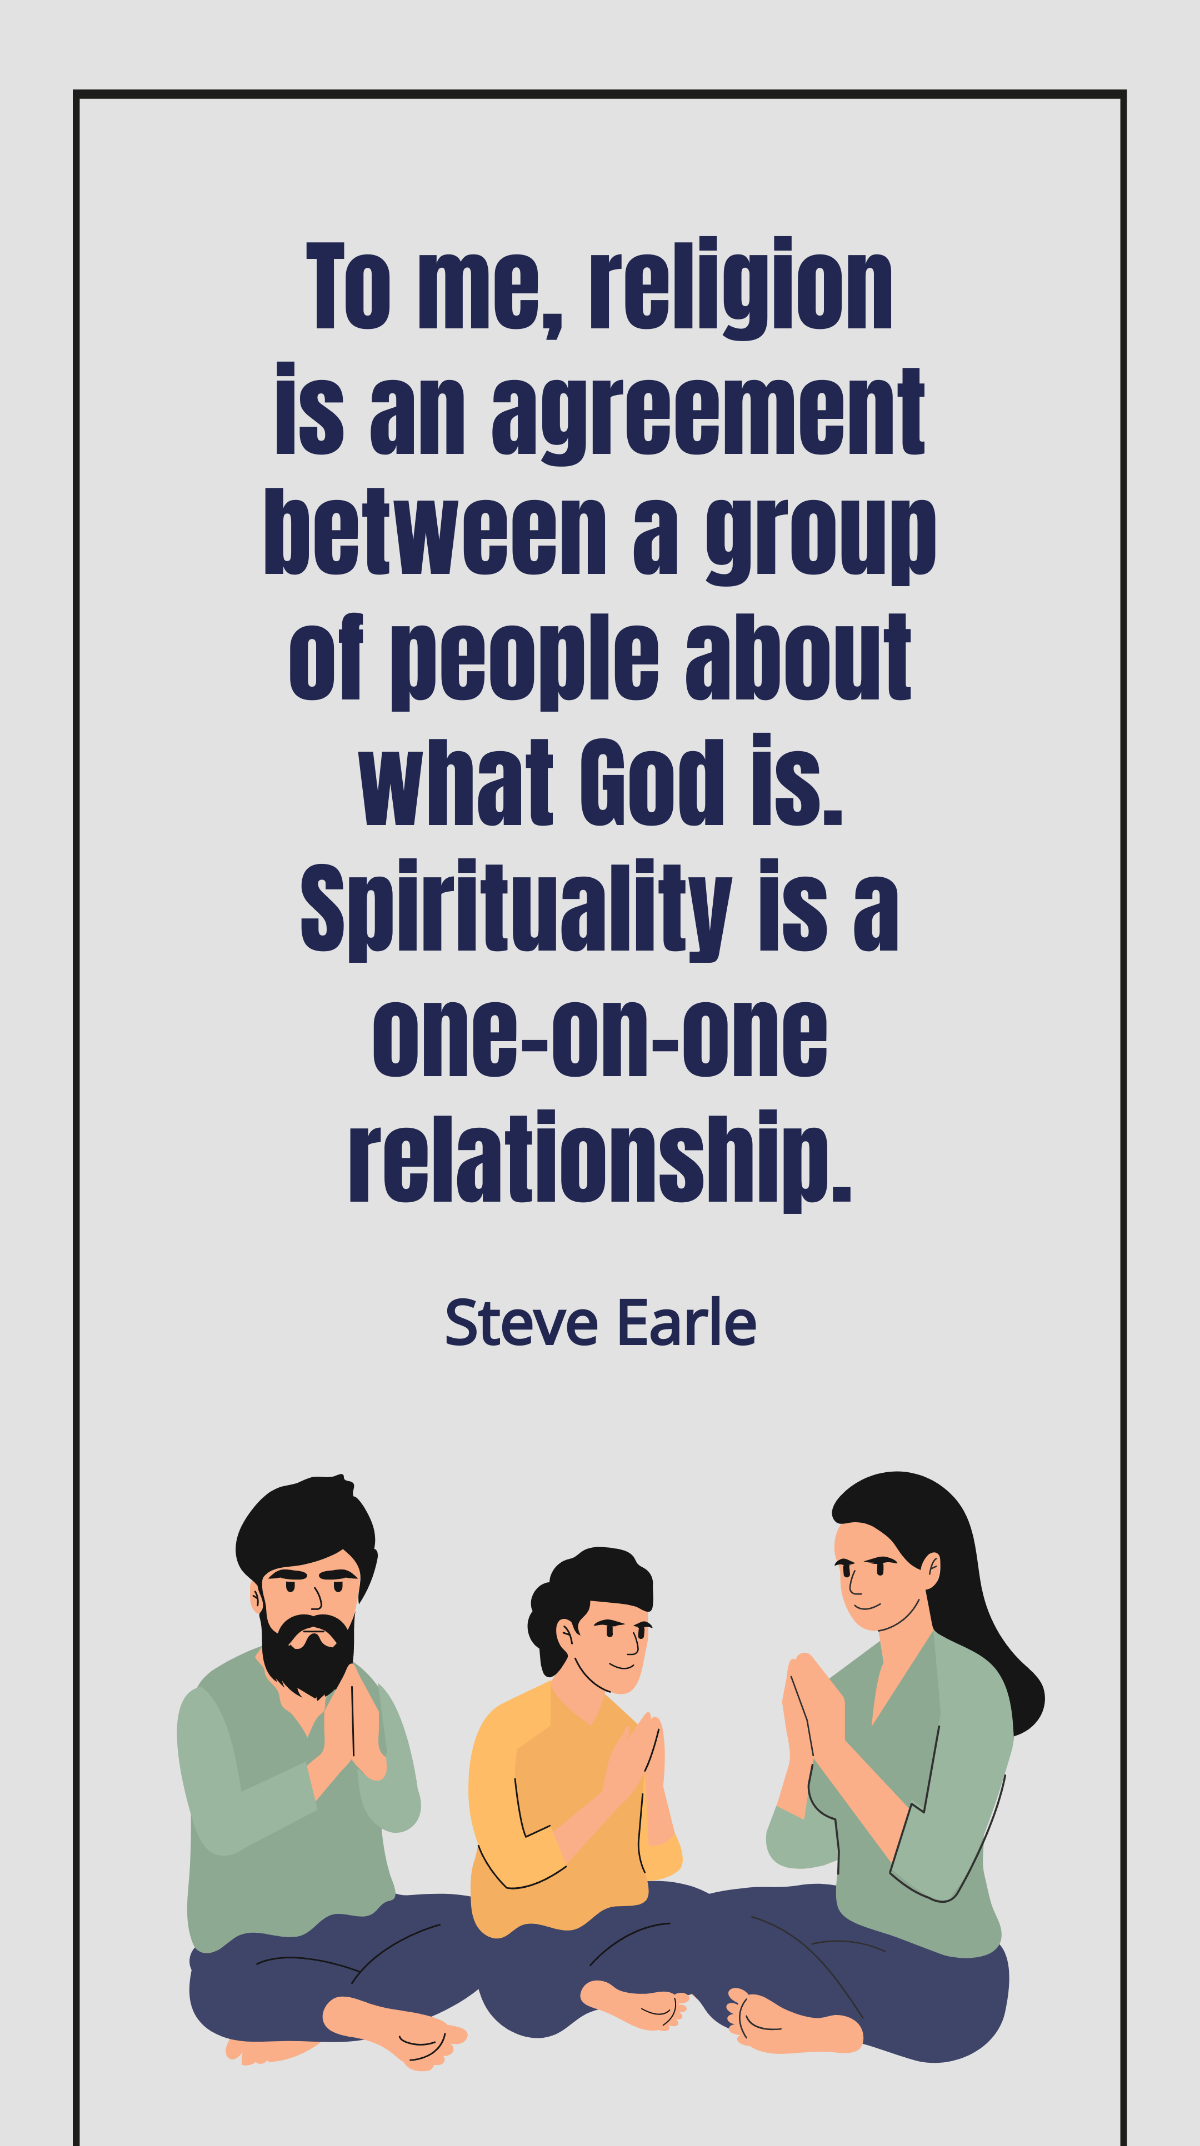 Steve Earle - To me, religion is an agreement between a group of people about what God is. Spirituality is a one-on-one relationship. Template